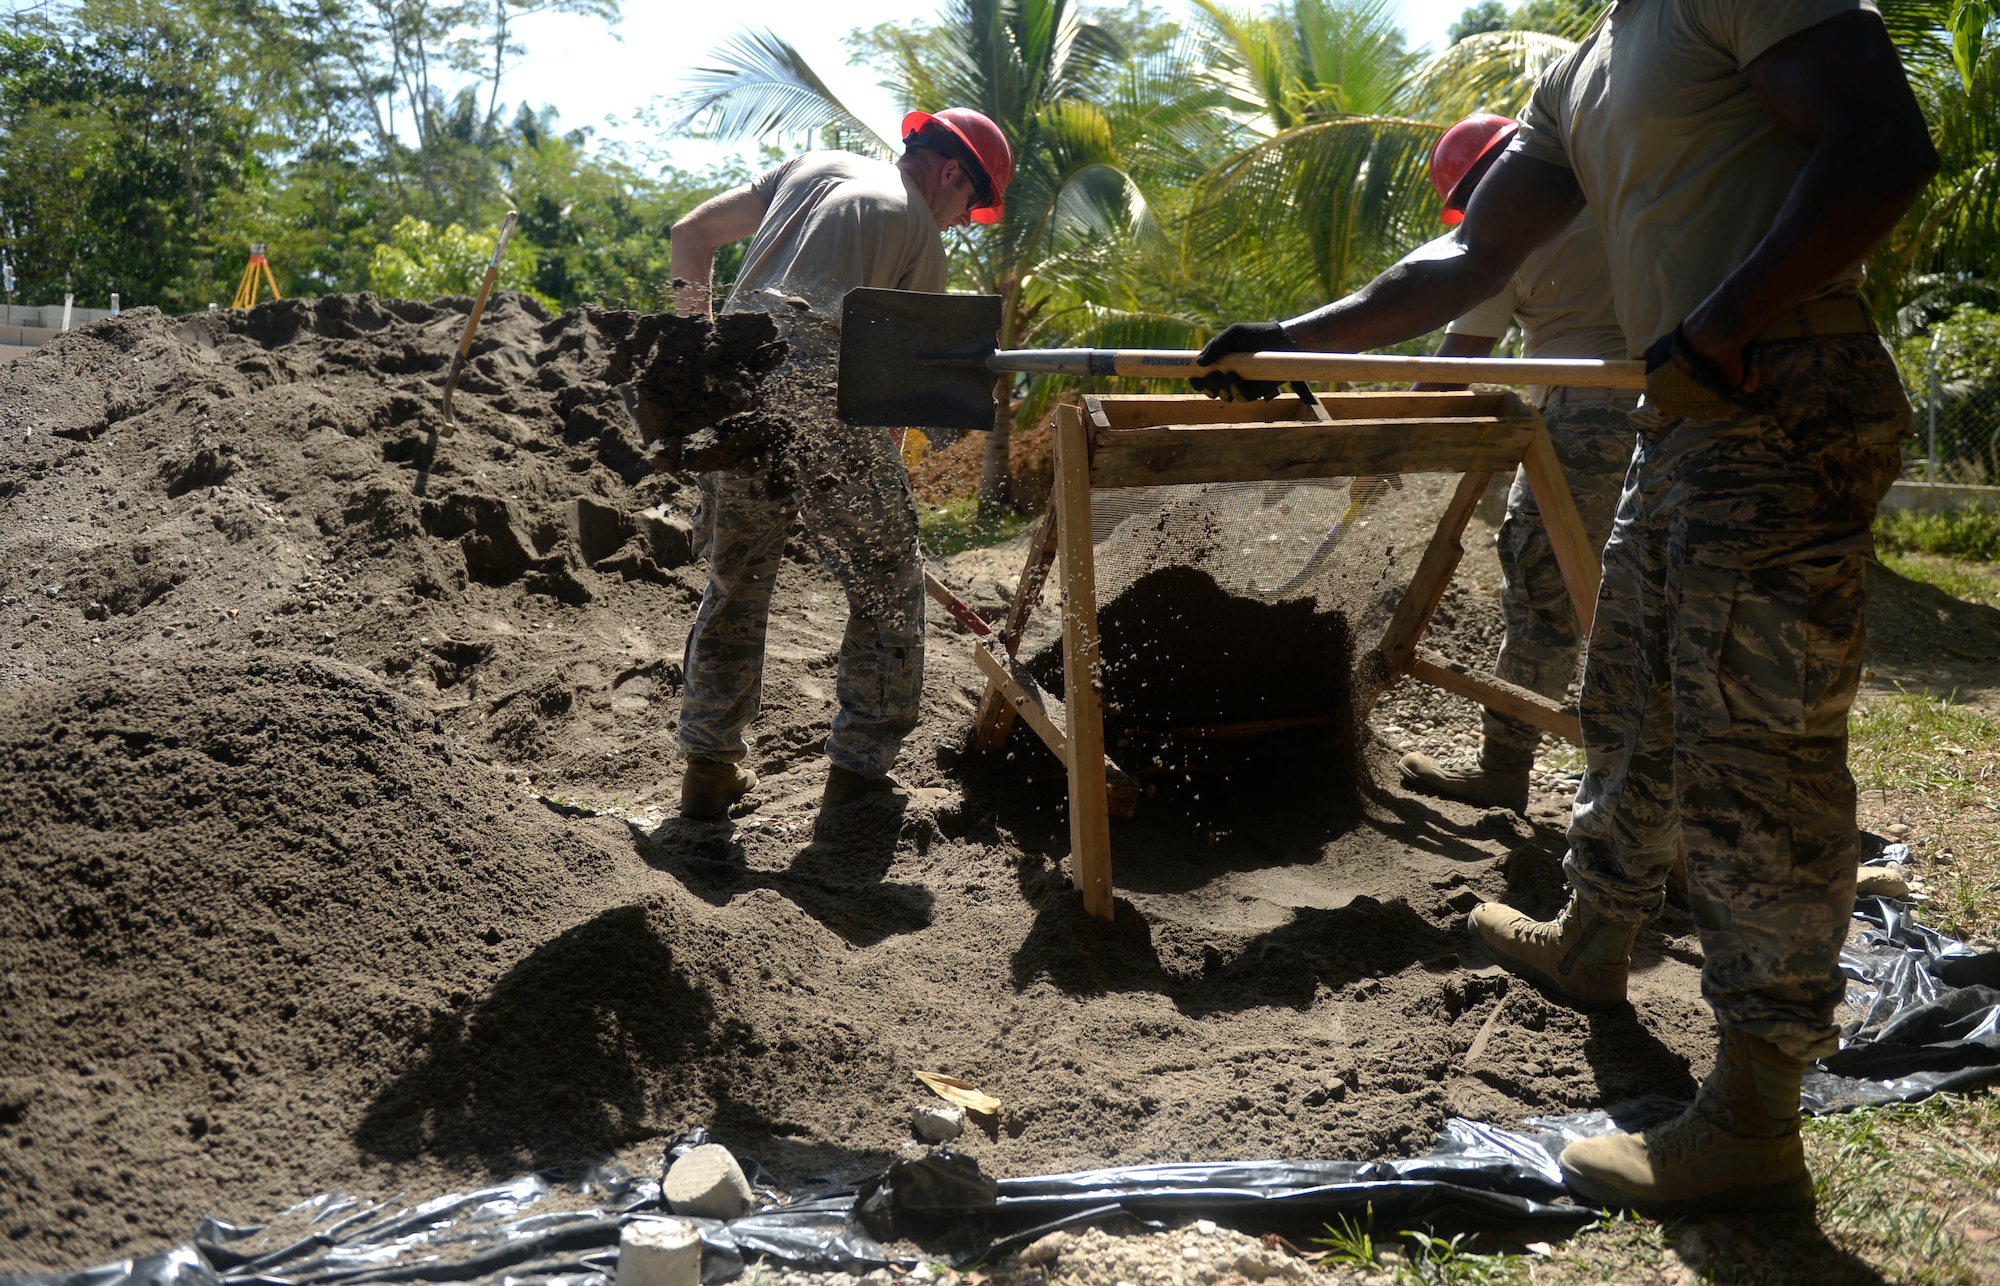 Members of the 823rd Expeditionary RED HORSE Squadron use a screen to sift through dirt, which will be used to create mortar for the bricks used in the creation of the new building at the Gabriela Mistral school in Ocotoes Alto, Honduras, June 1, 2015. The RED HORSE members are in Honduras to participate in a New Horizons training exercise taking place throughout Trujillo and Tocoa. New Horizons was launched in the 1980s and is an annual joint humanitarian assistance exercise that U.S. Southern Command conducts with a partner nation in Central America, South America or the Caribbean. The exercise improves joint training readiness of U.S. and partner nation civil engineers, medical professionals and support personnel through humanitarian assistance activities. (U.S. Air Force photo by Capt. David J. Murphy/Released)